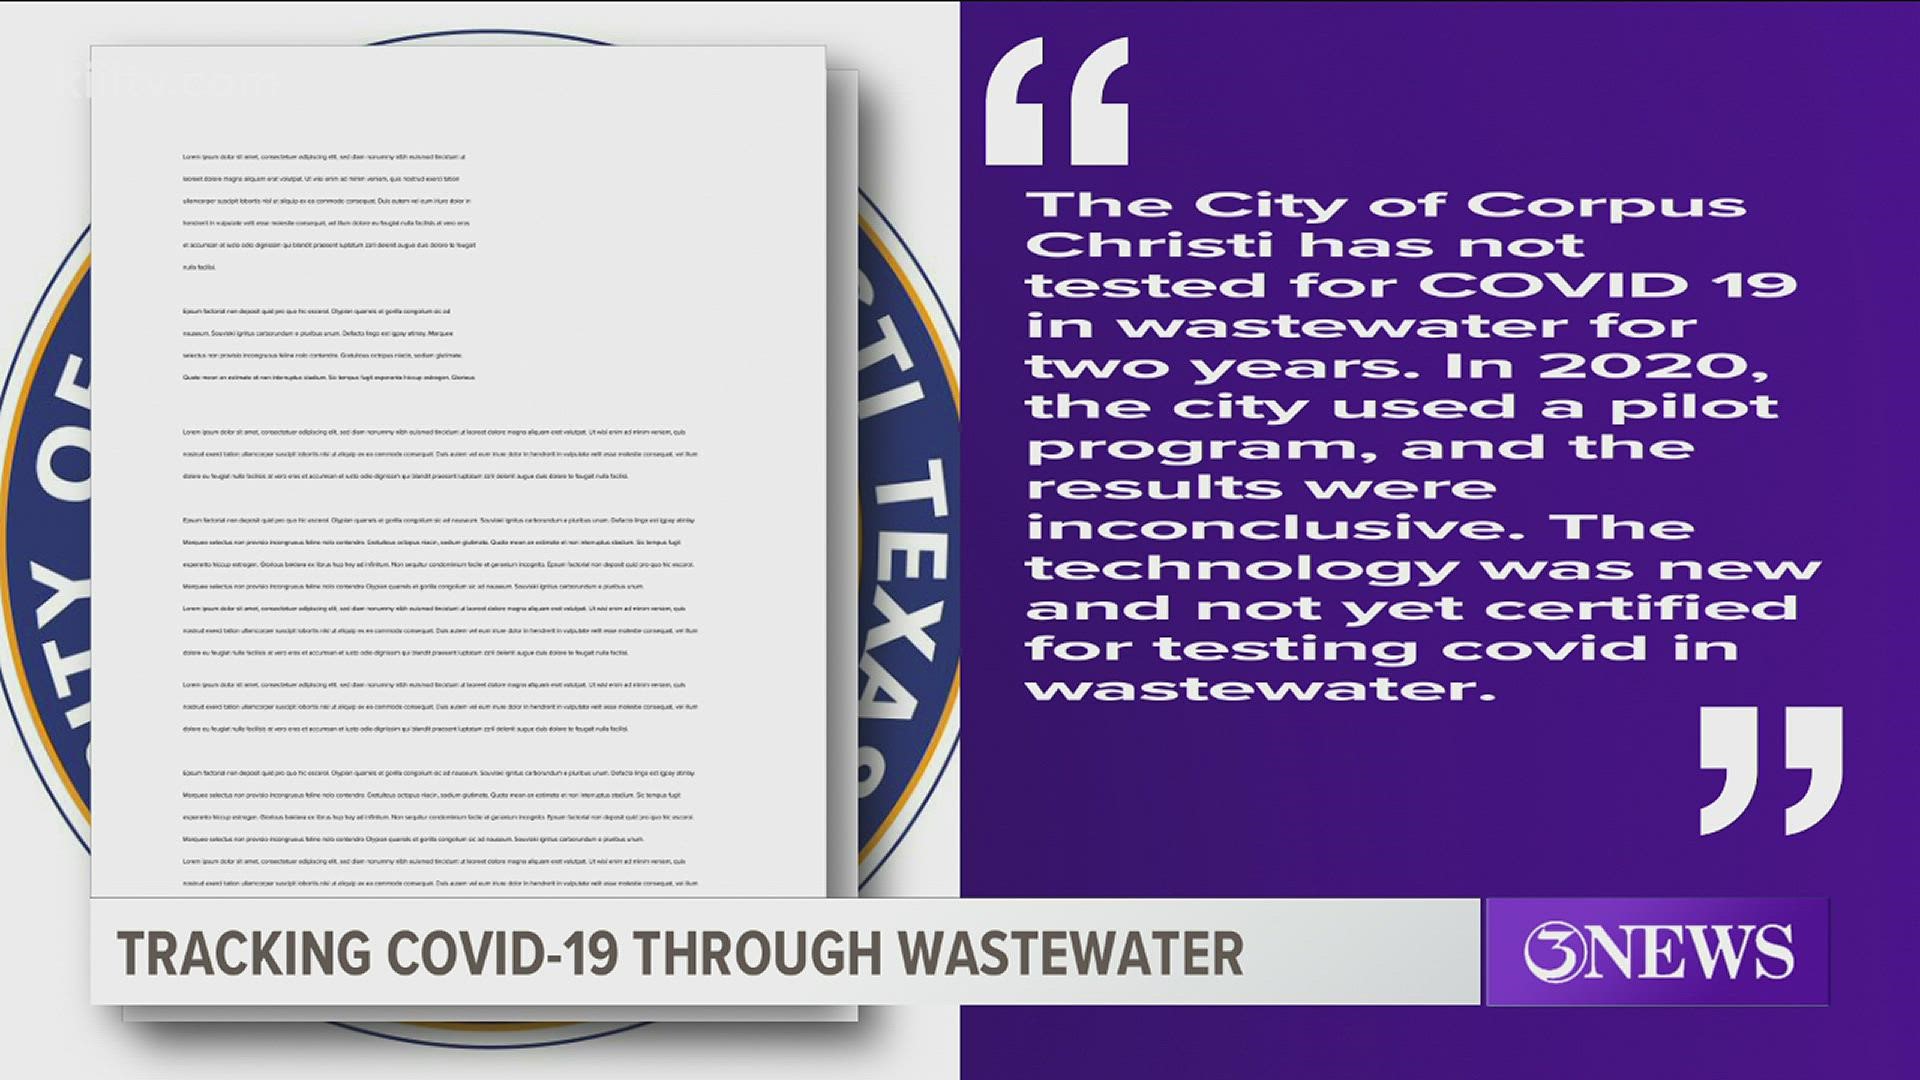 When compared with clinical testing, wastewater testing can provide public health agencies with a 1-2 week of lead time for infection rate data.